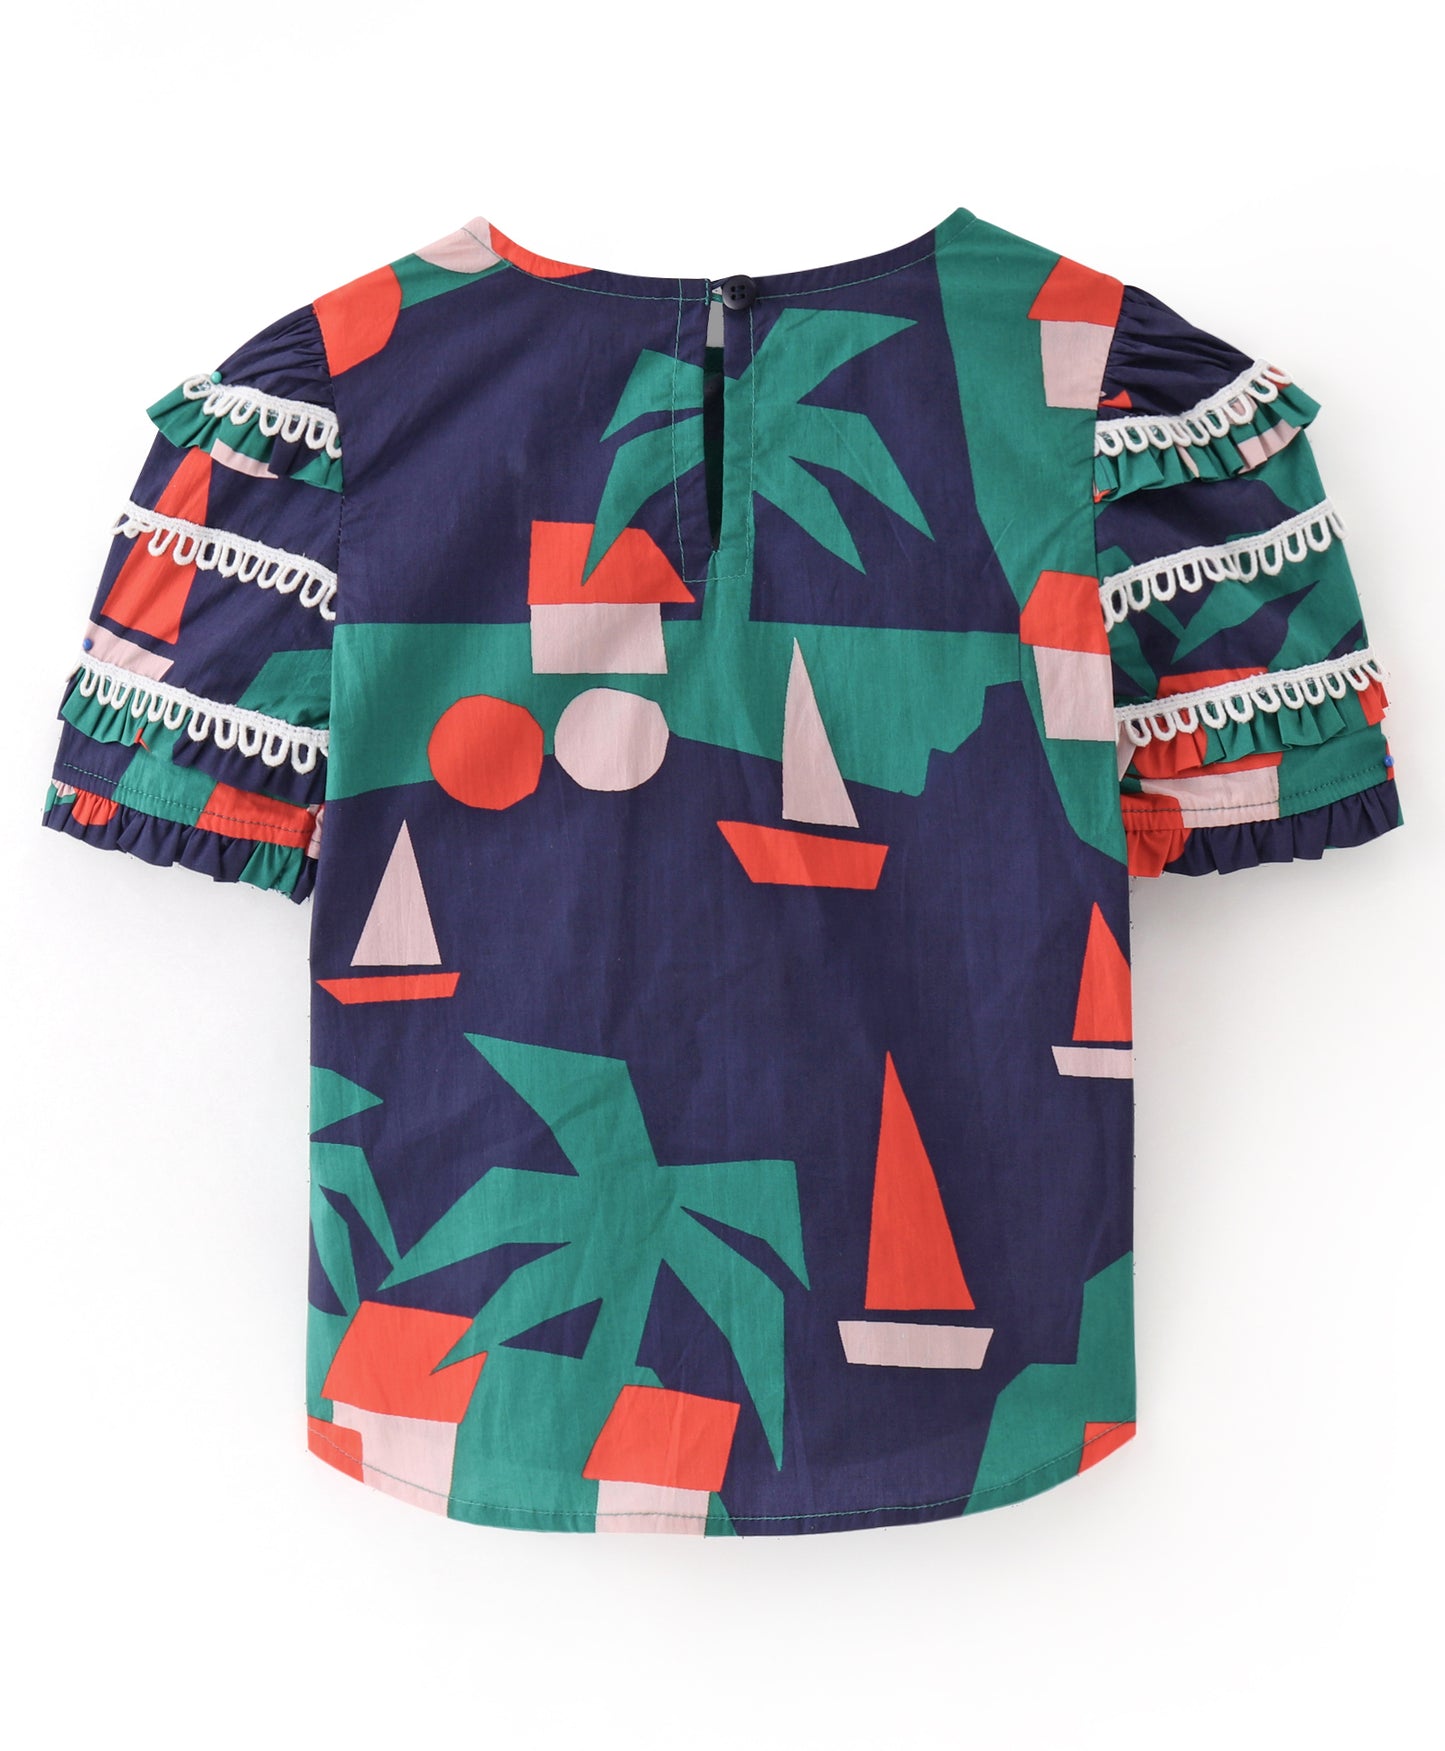 BOAT PRINT TOP WITH LACES AT SLEEVES